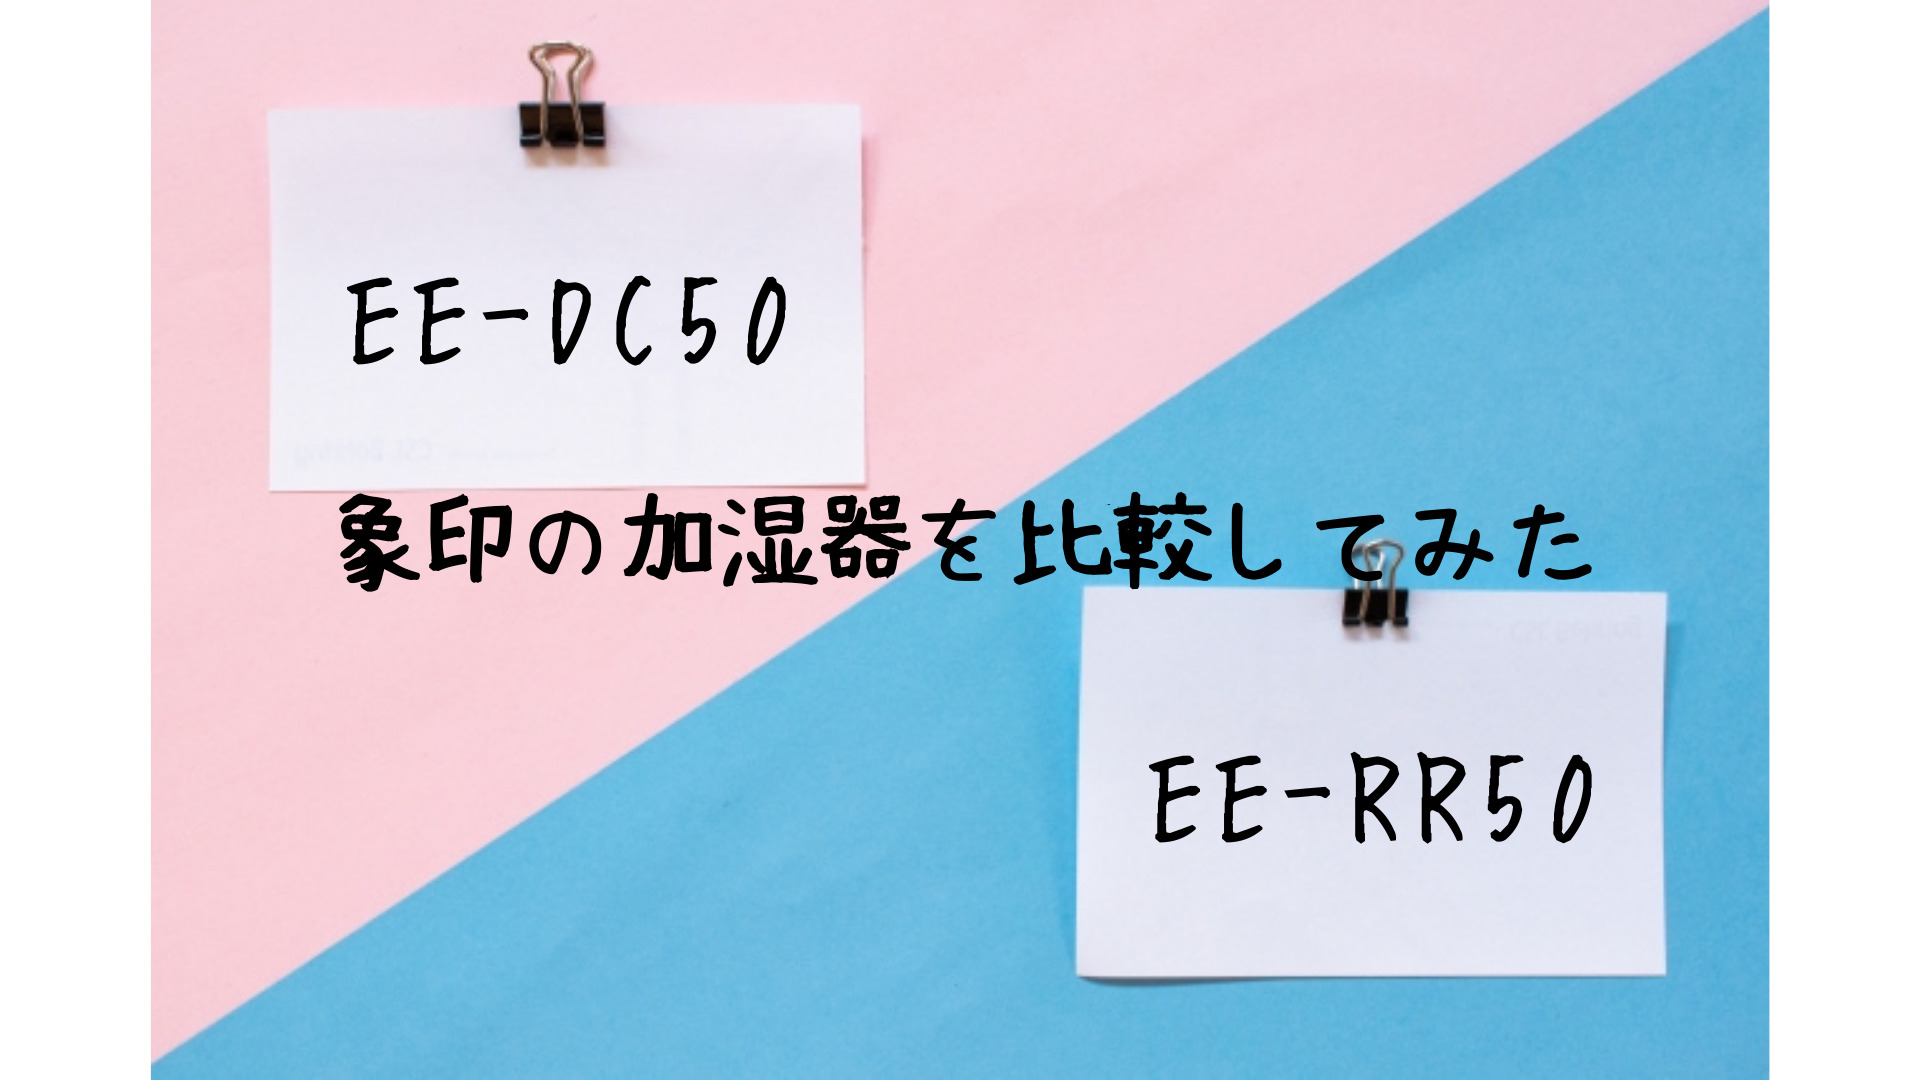 EE-DC50、EE-RR50の違いを比較